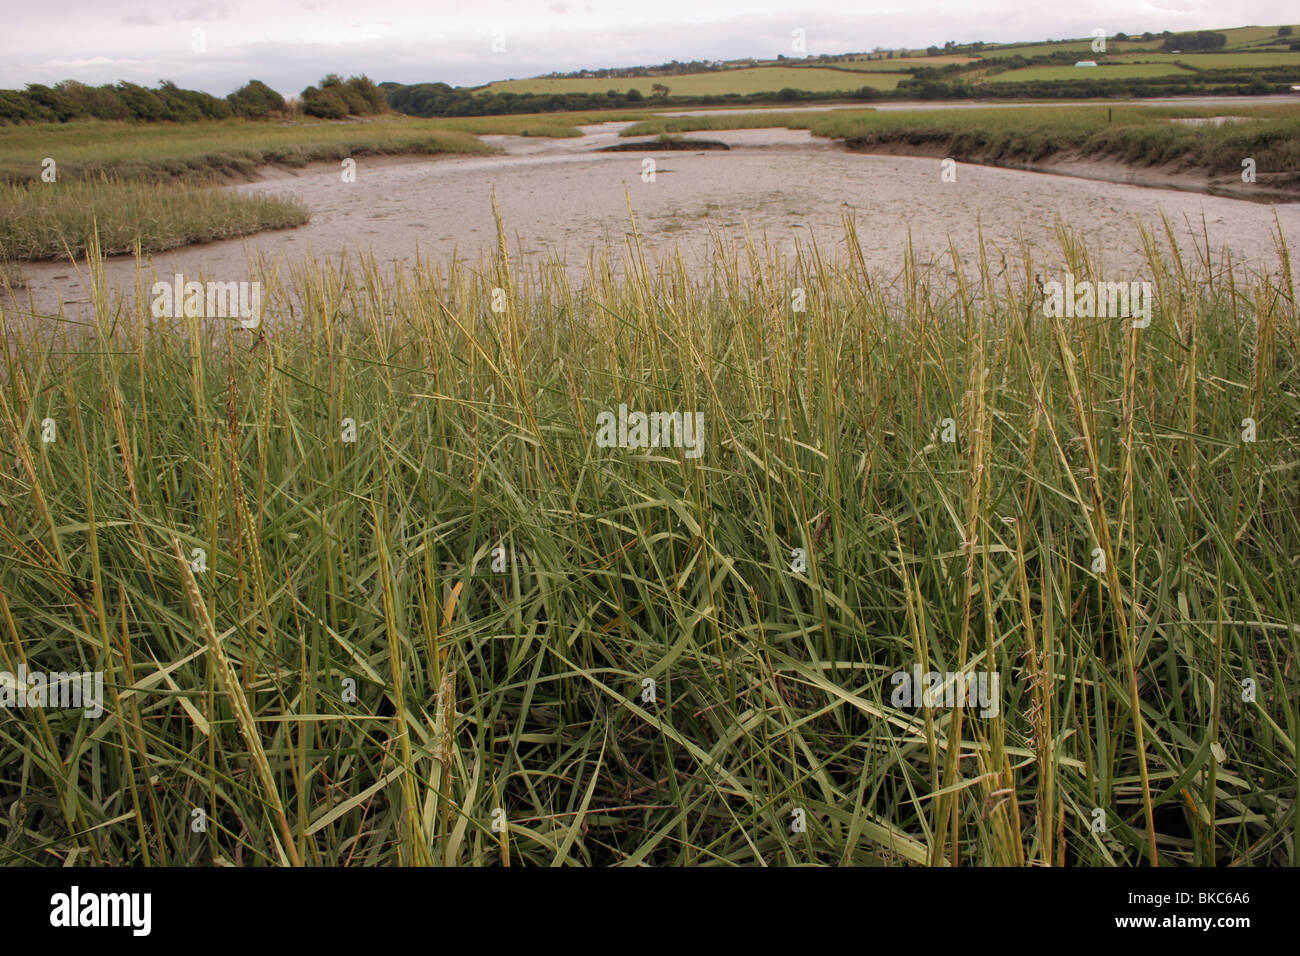 Common cord-grass (Spartina anglica : Poaceae) in flower on mudflats, UK. Stock Photo